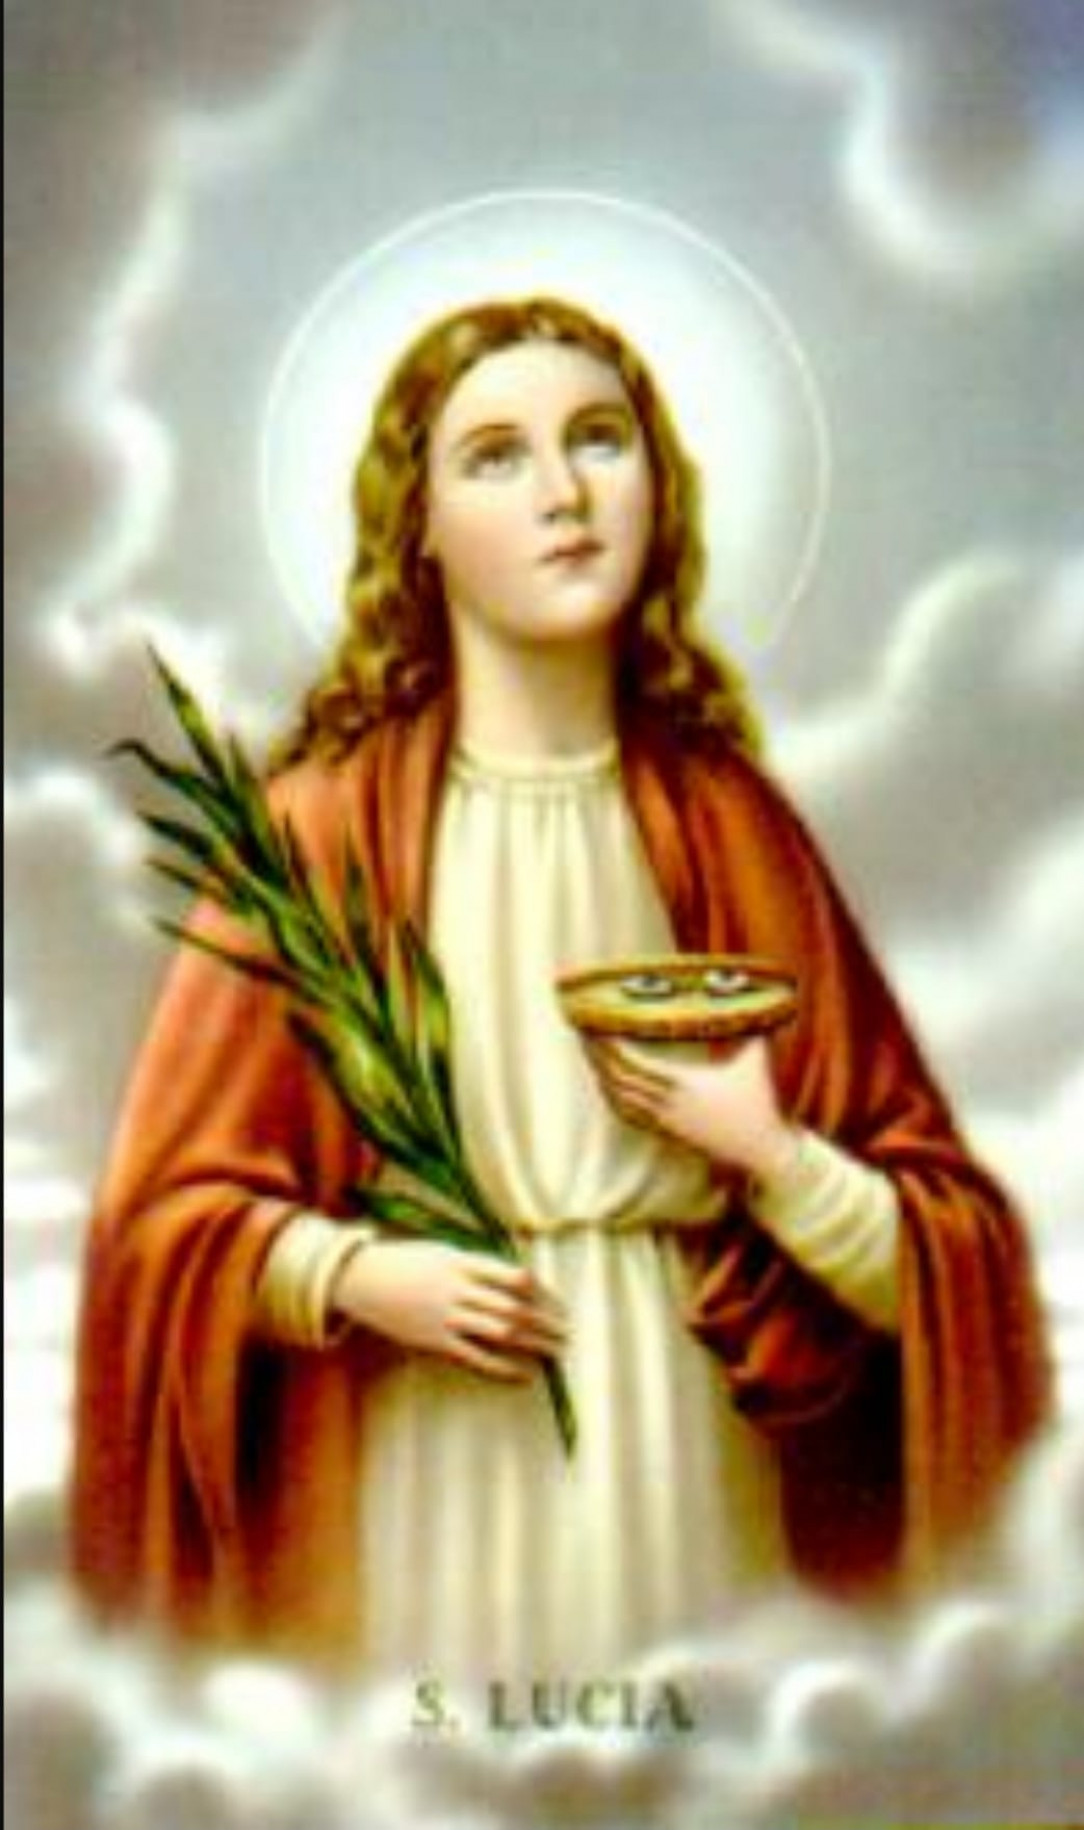 13th of December is the feast of Saint Lucy